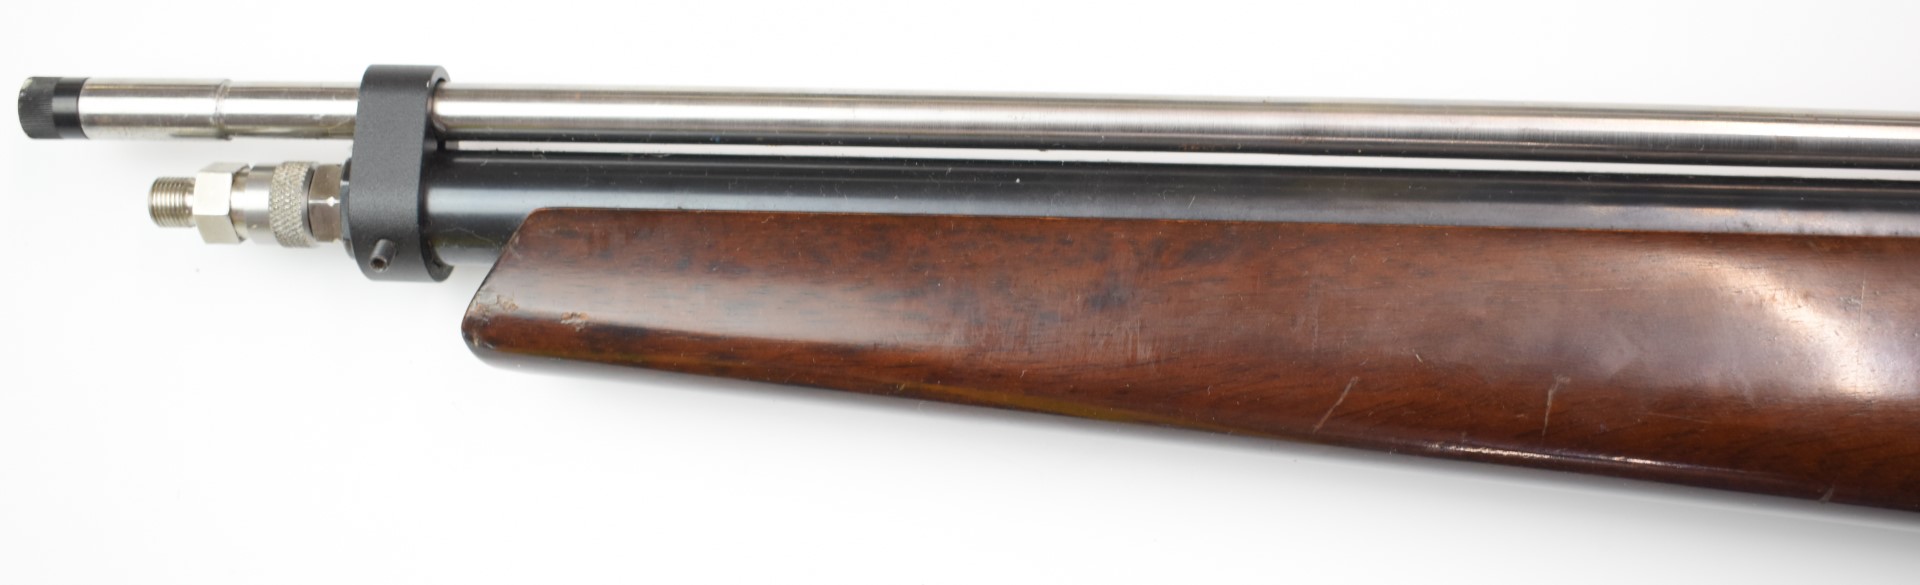 AGS-PCR1 .22 PCP bolt-action air rifle with pistol grip and adjustable trigger, serial number 00911. - Image 9 of 9